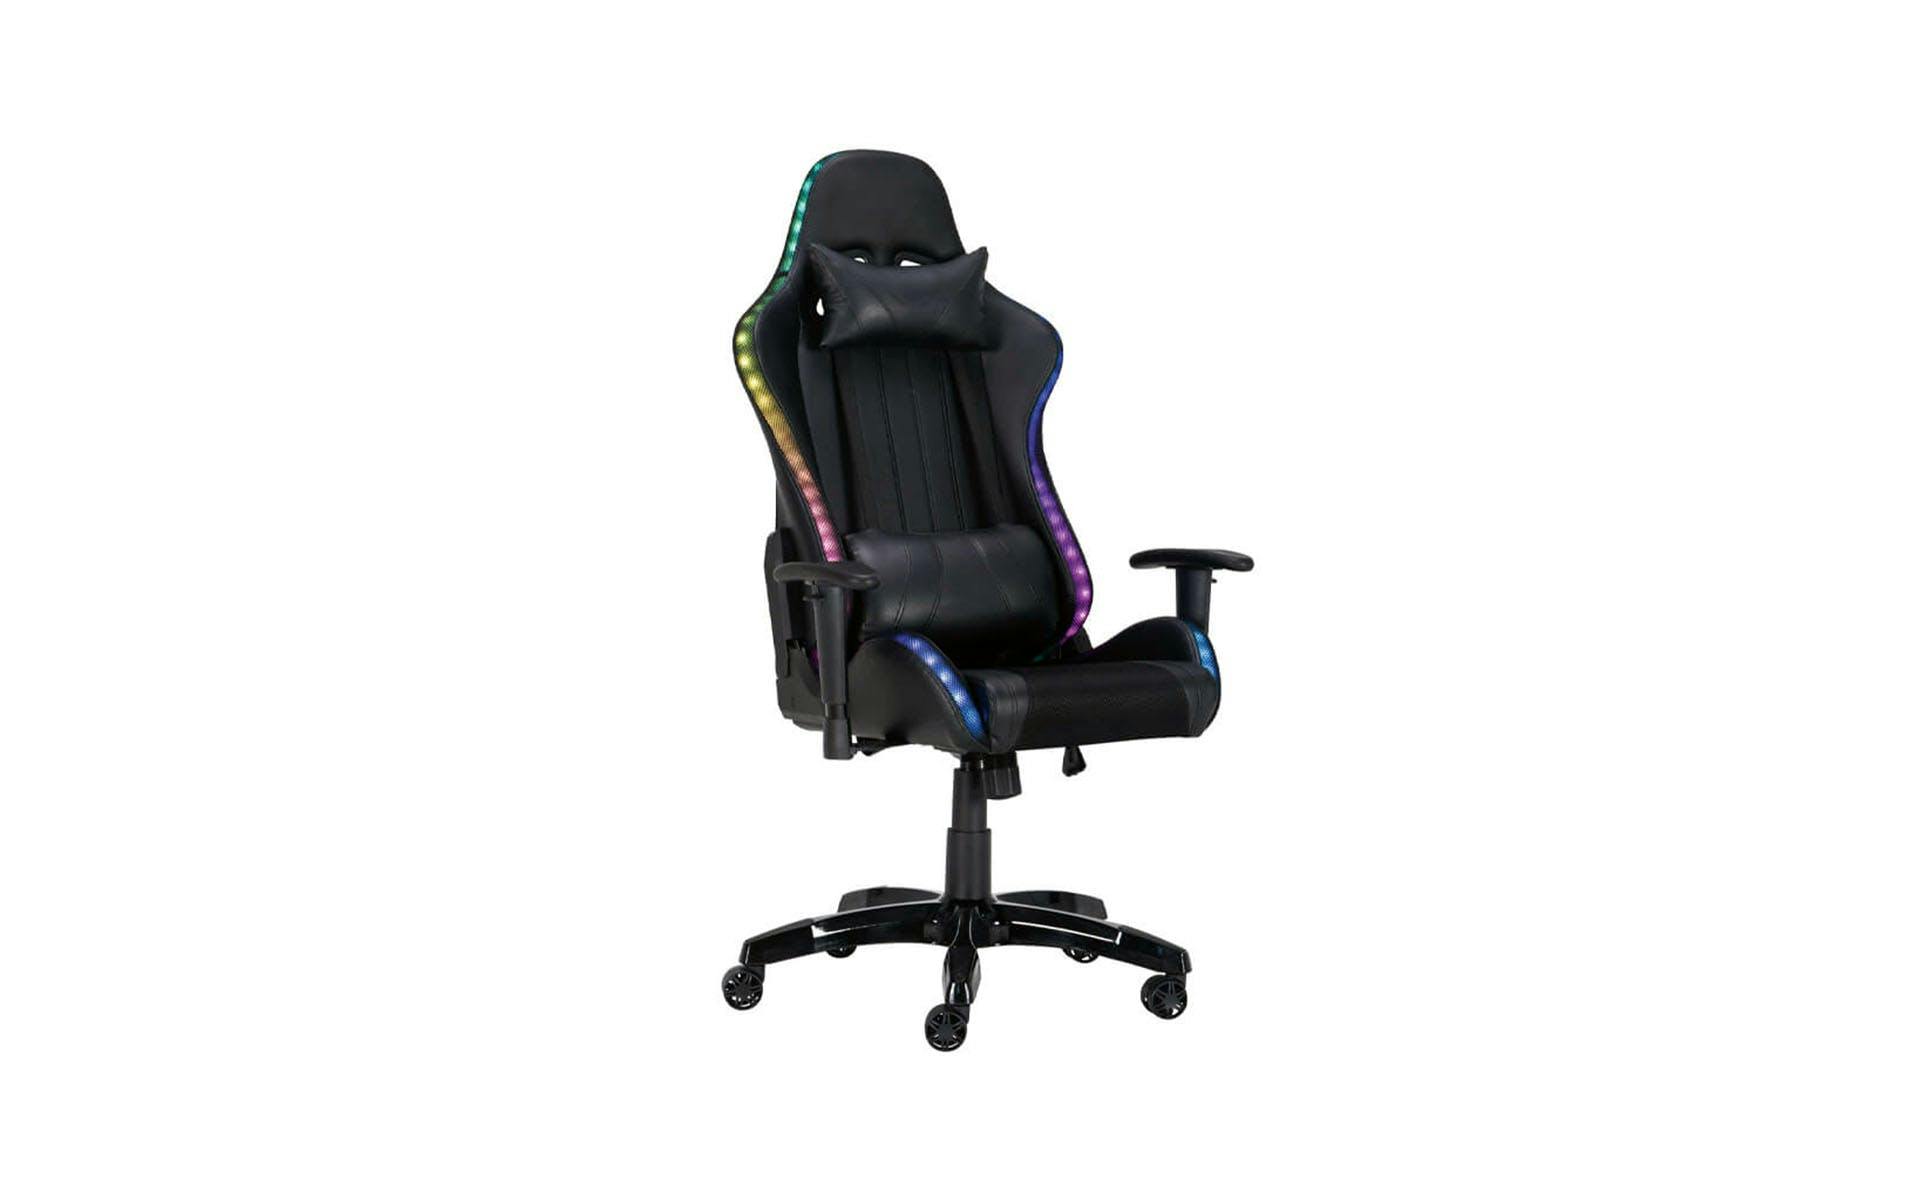 Office chair with many setting options as a gaming chair